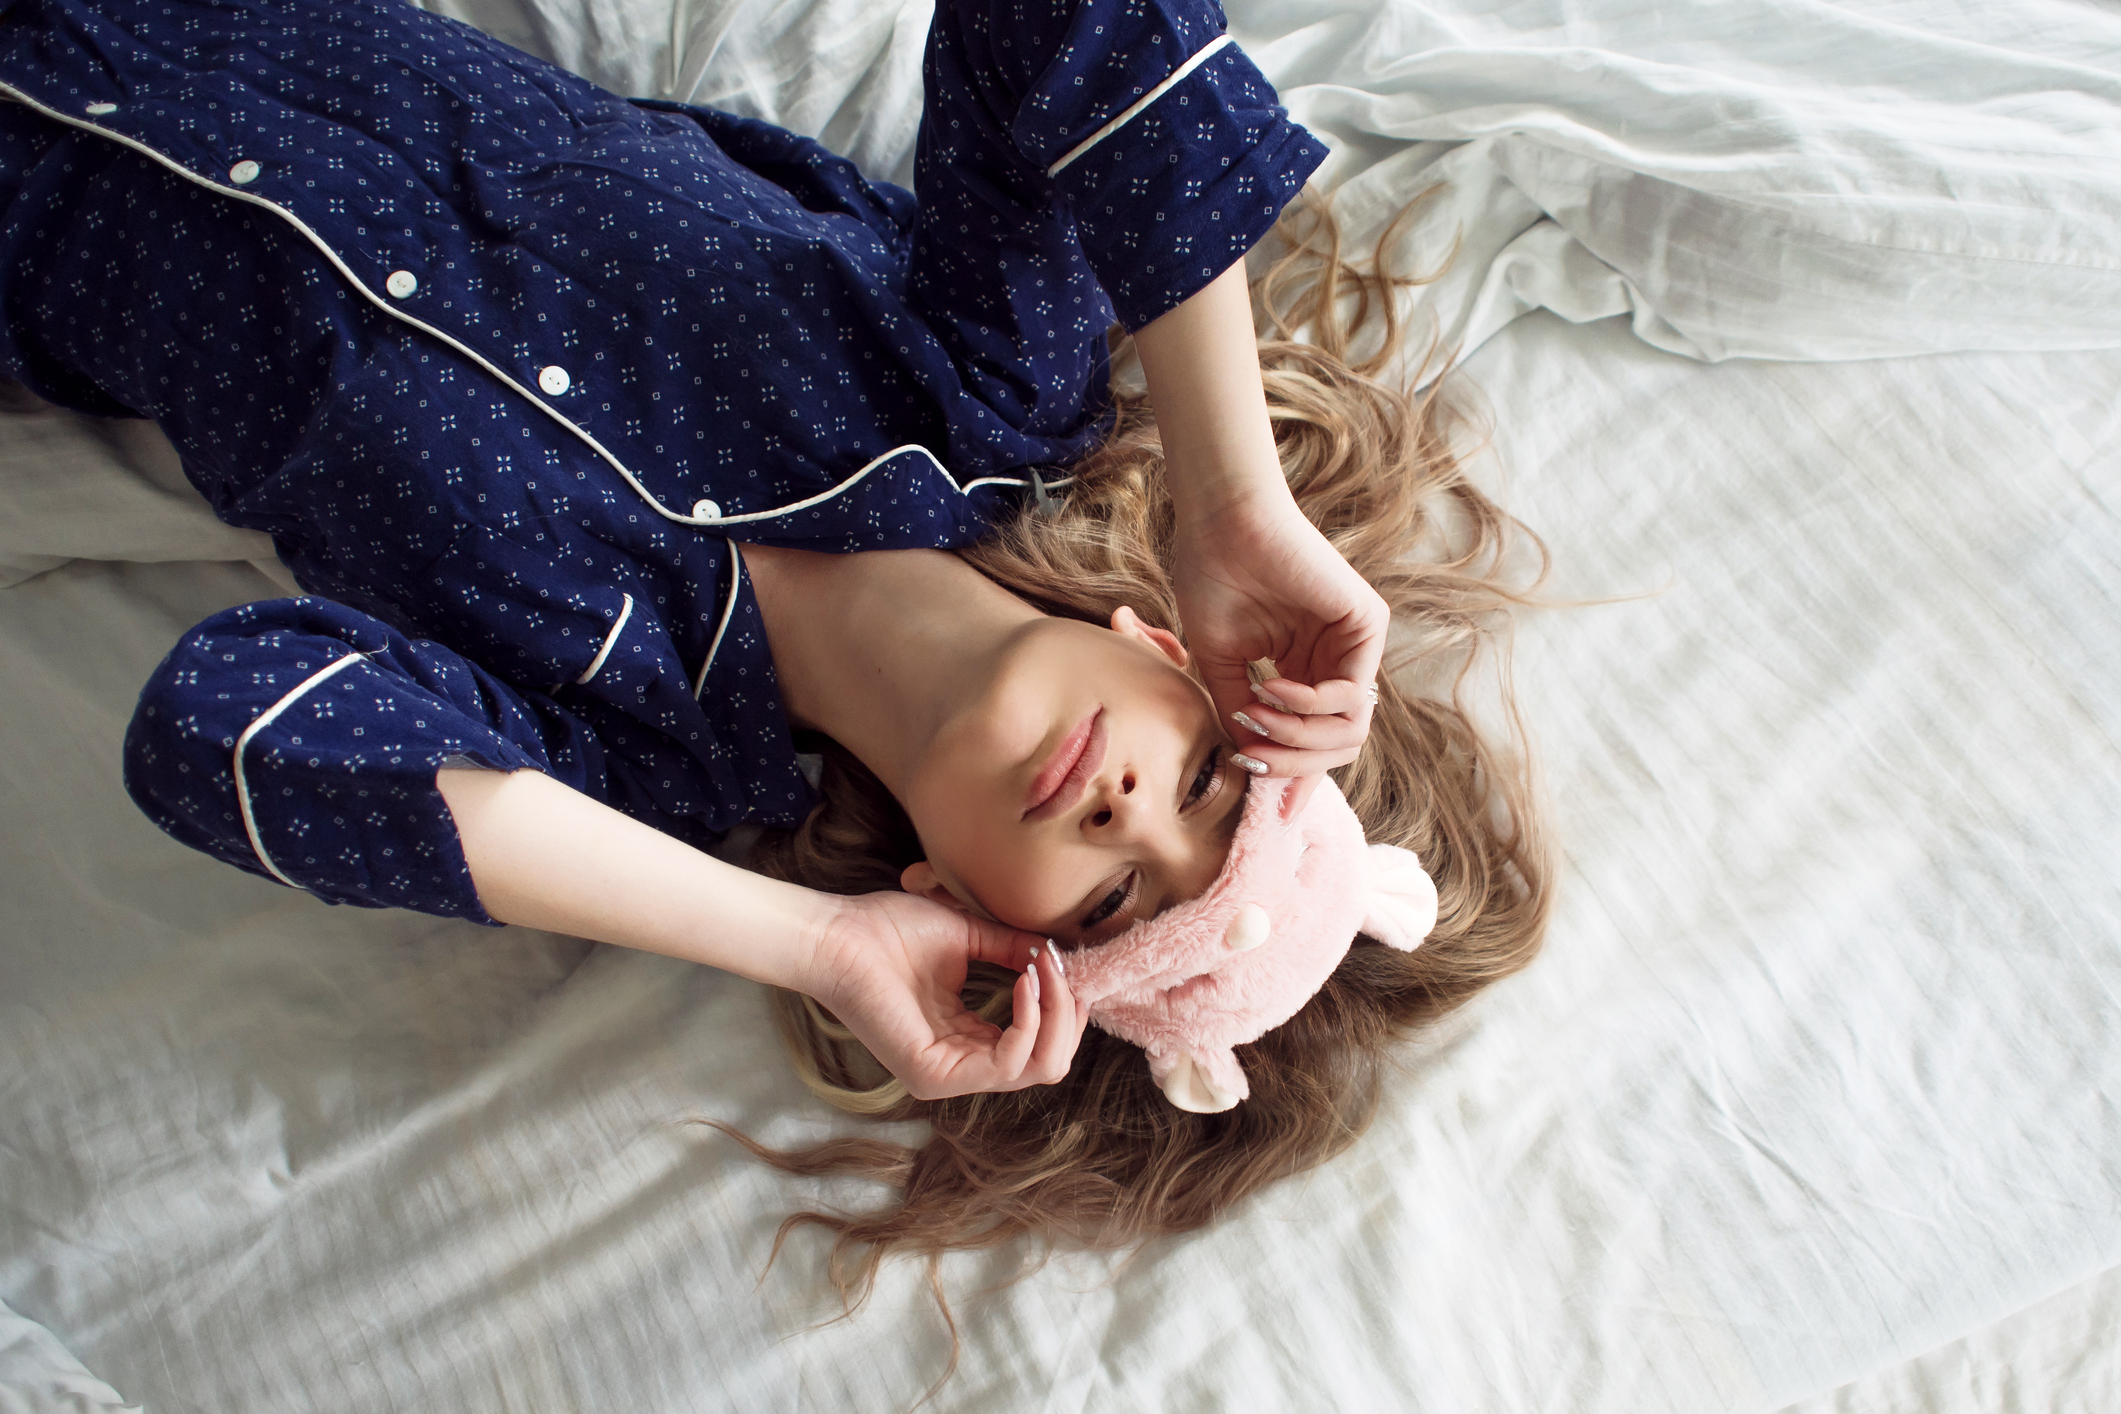  blonde girl in her bed in blue pajamas and sleep mask, top view